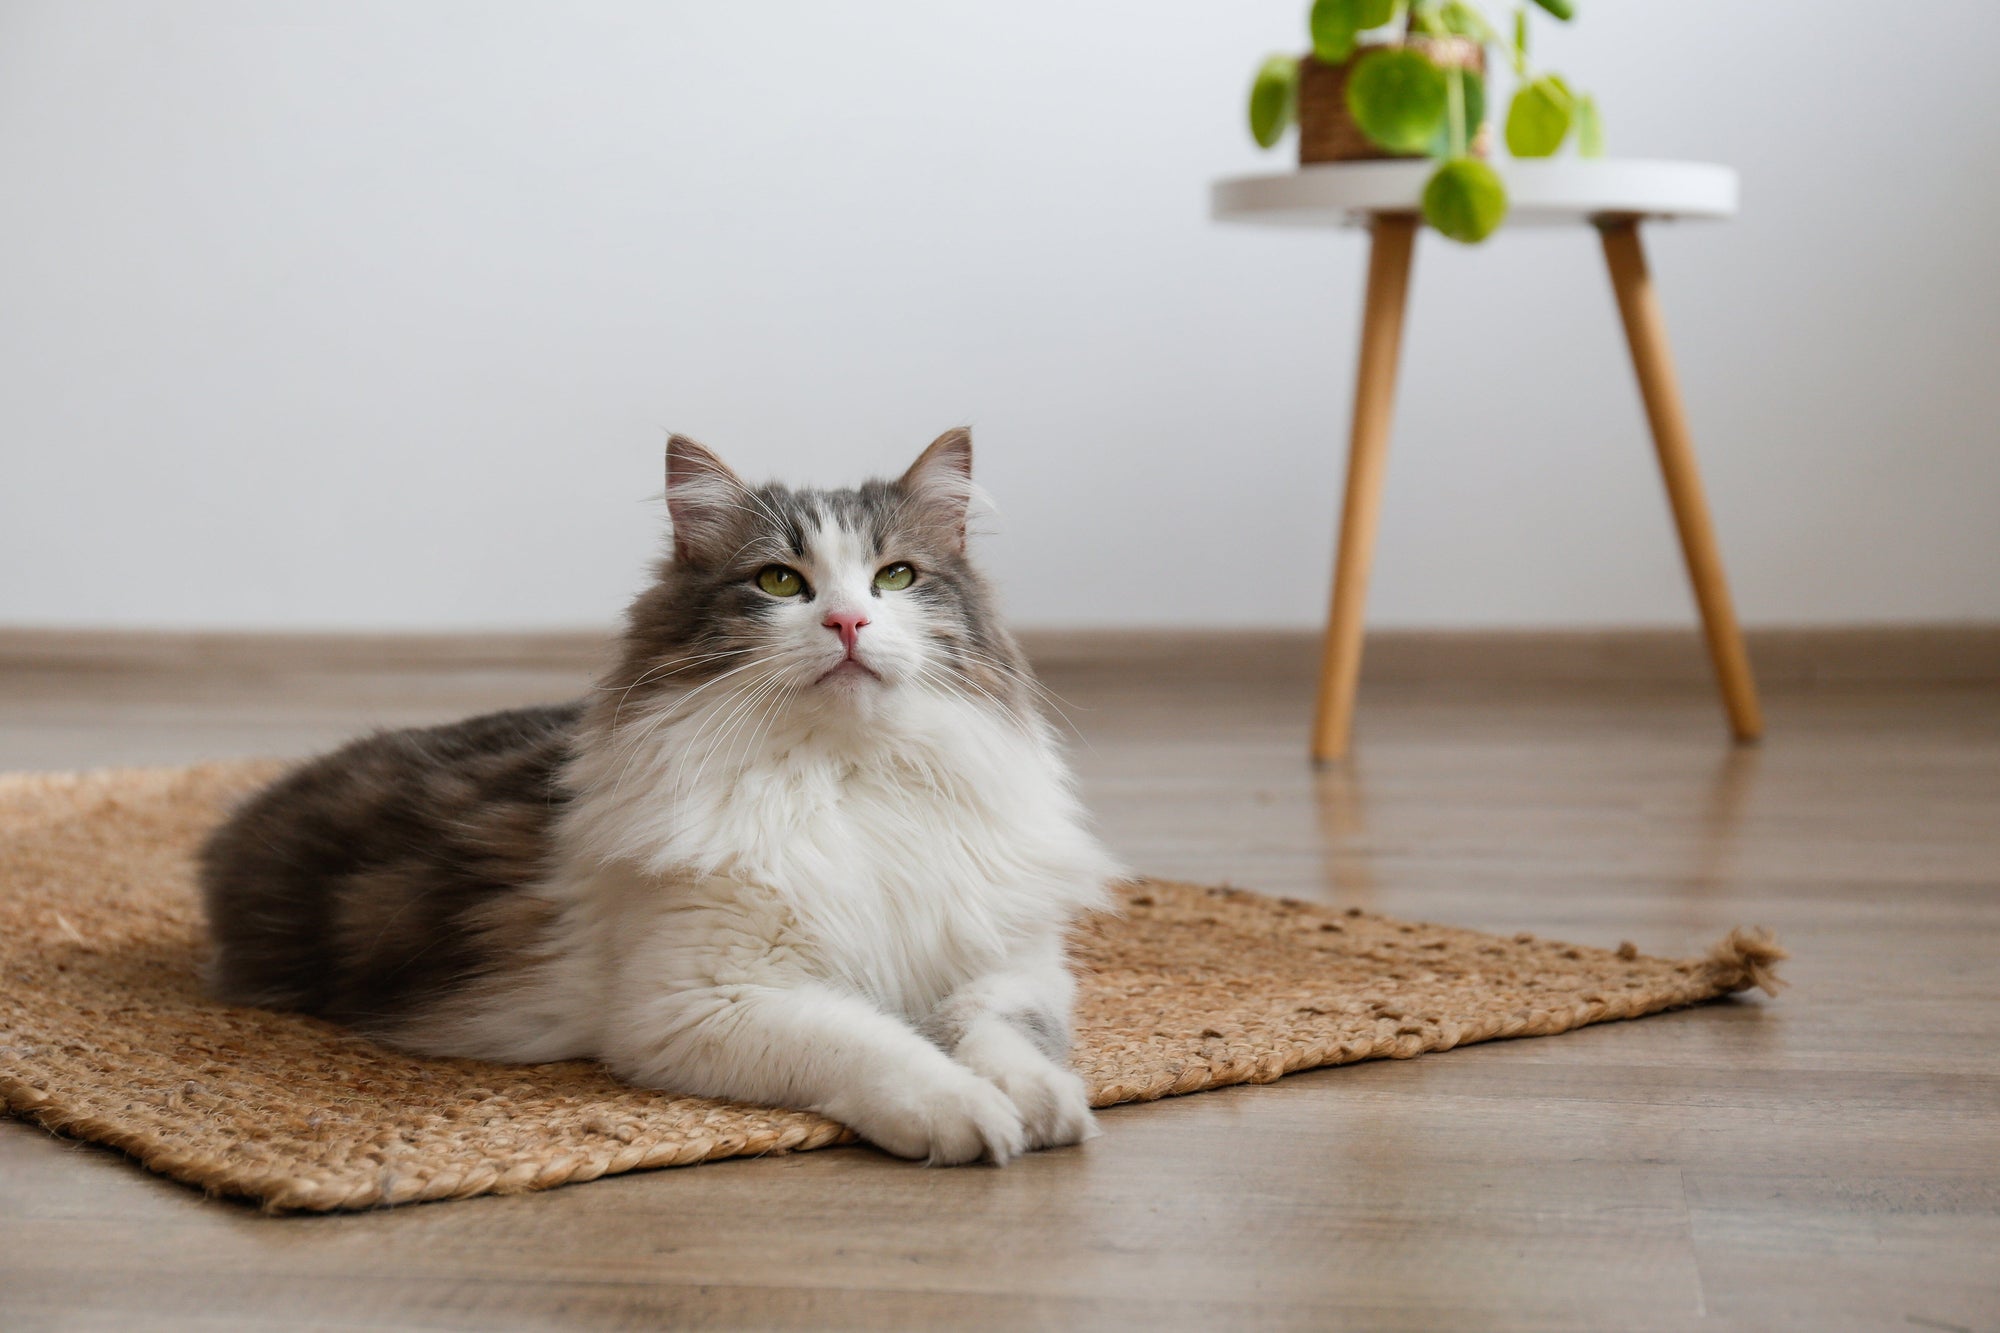 How to Stop a Cat from Shedding